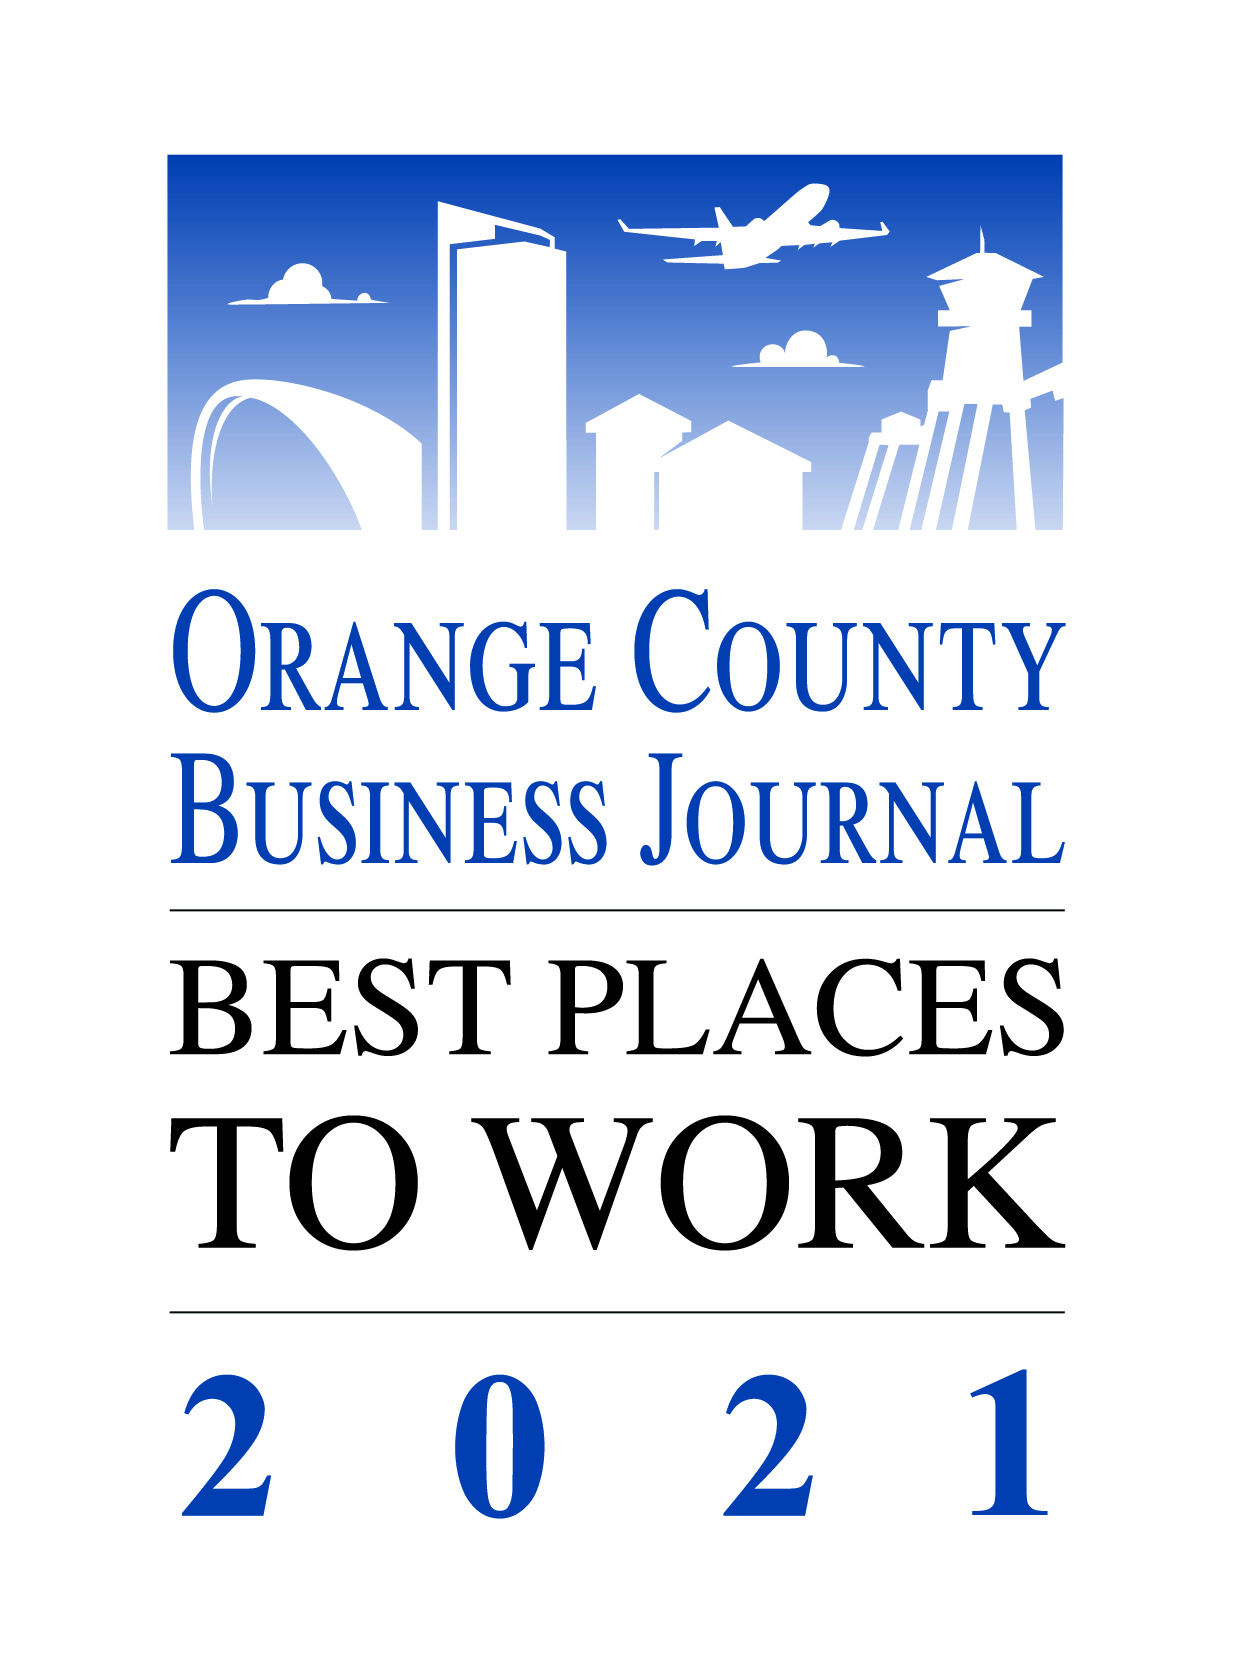 2021 Best Places to Work in Orange County